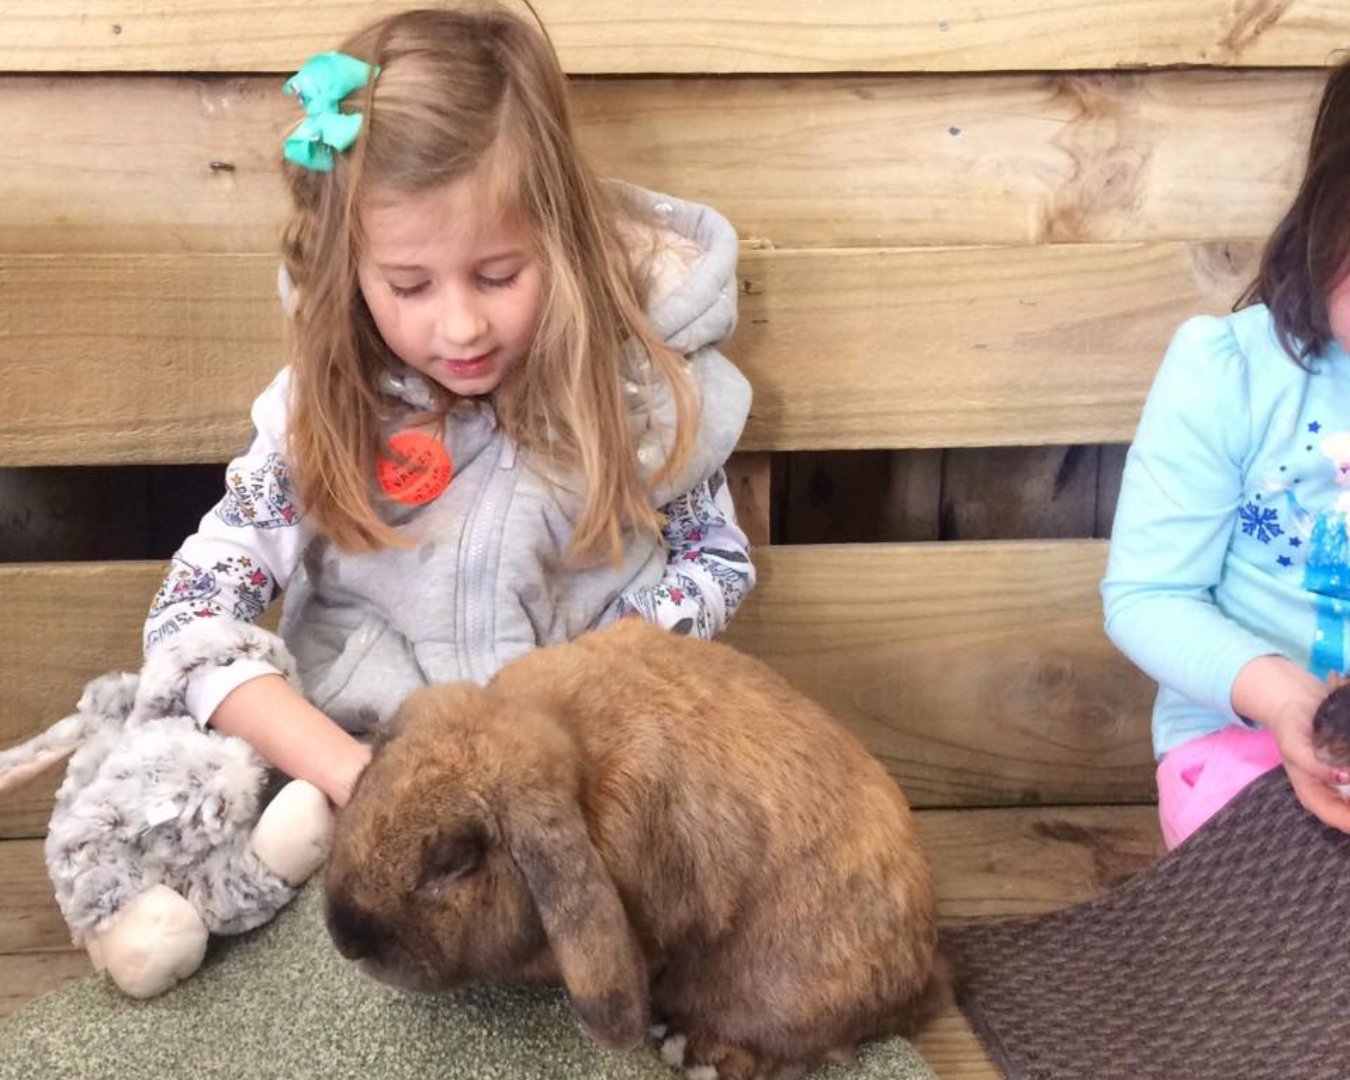 A little girl pats a gigantic rabbit sitting on her lap. 